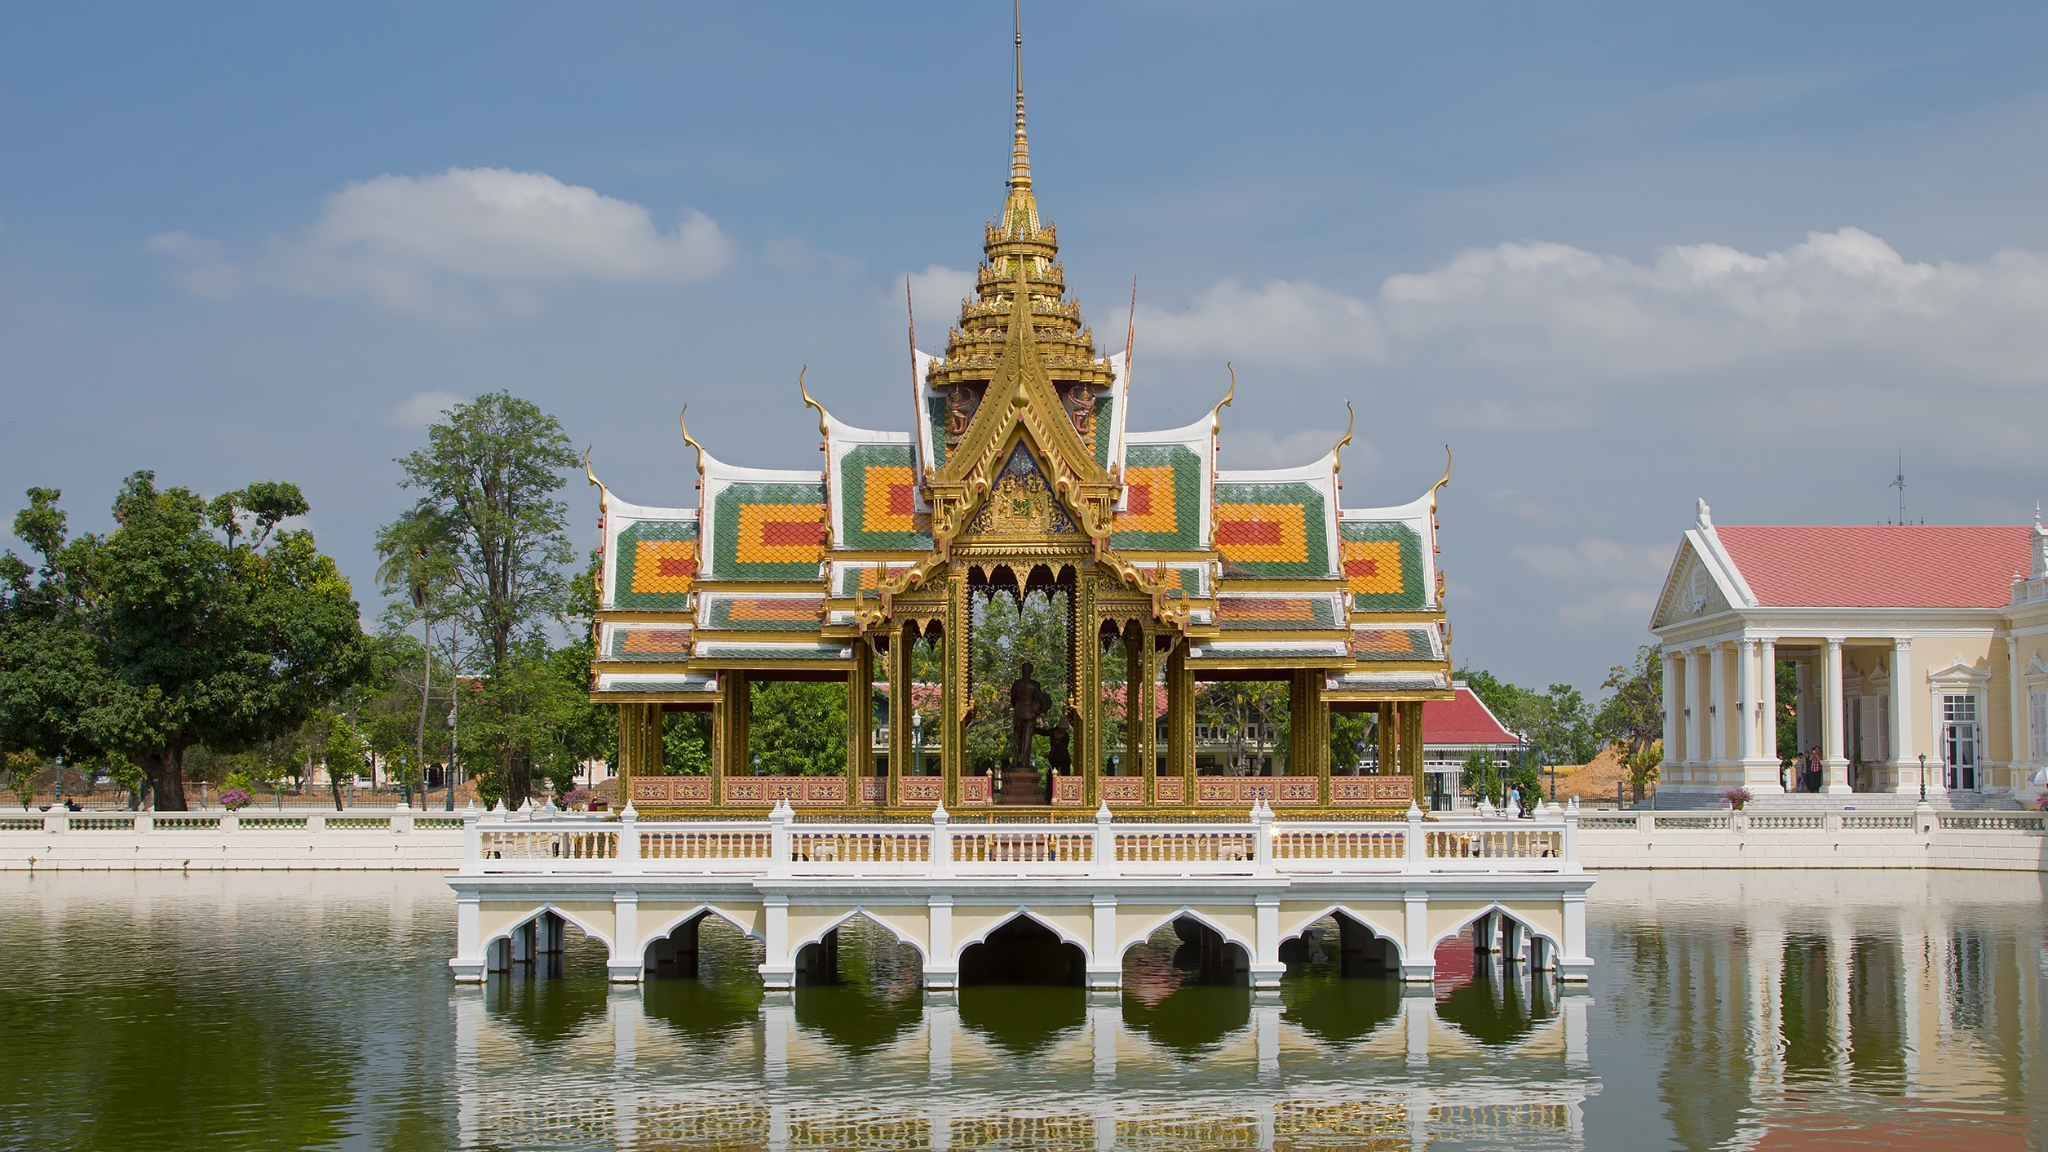 The Bang Pa In Palace With Its Mixture Of European, Gothic, And Thai Buddhist Architecture